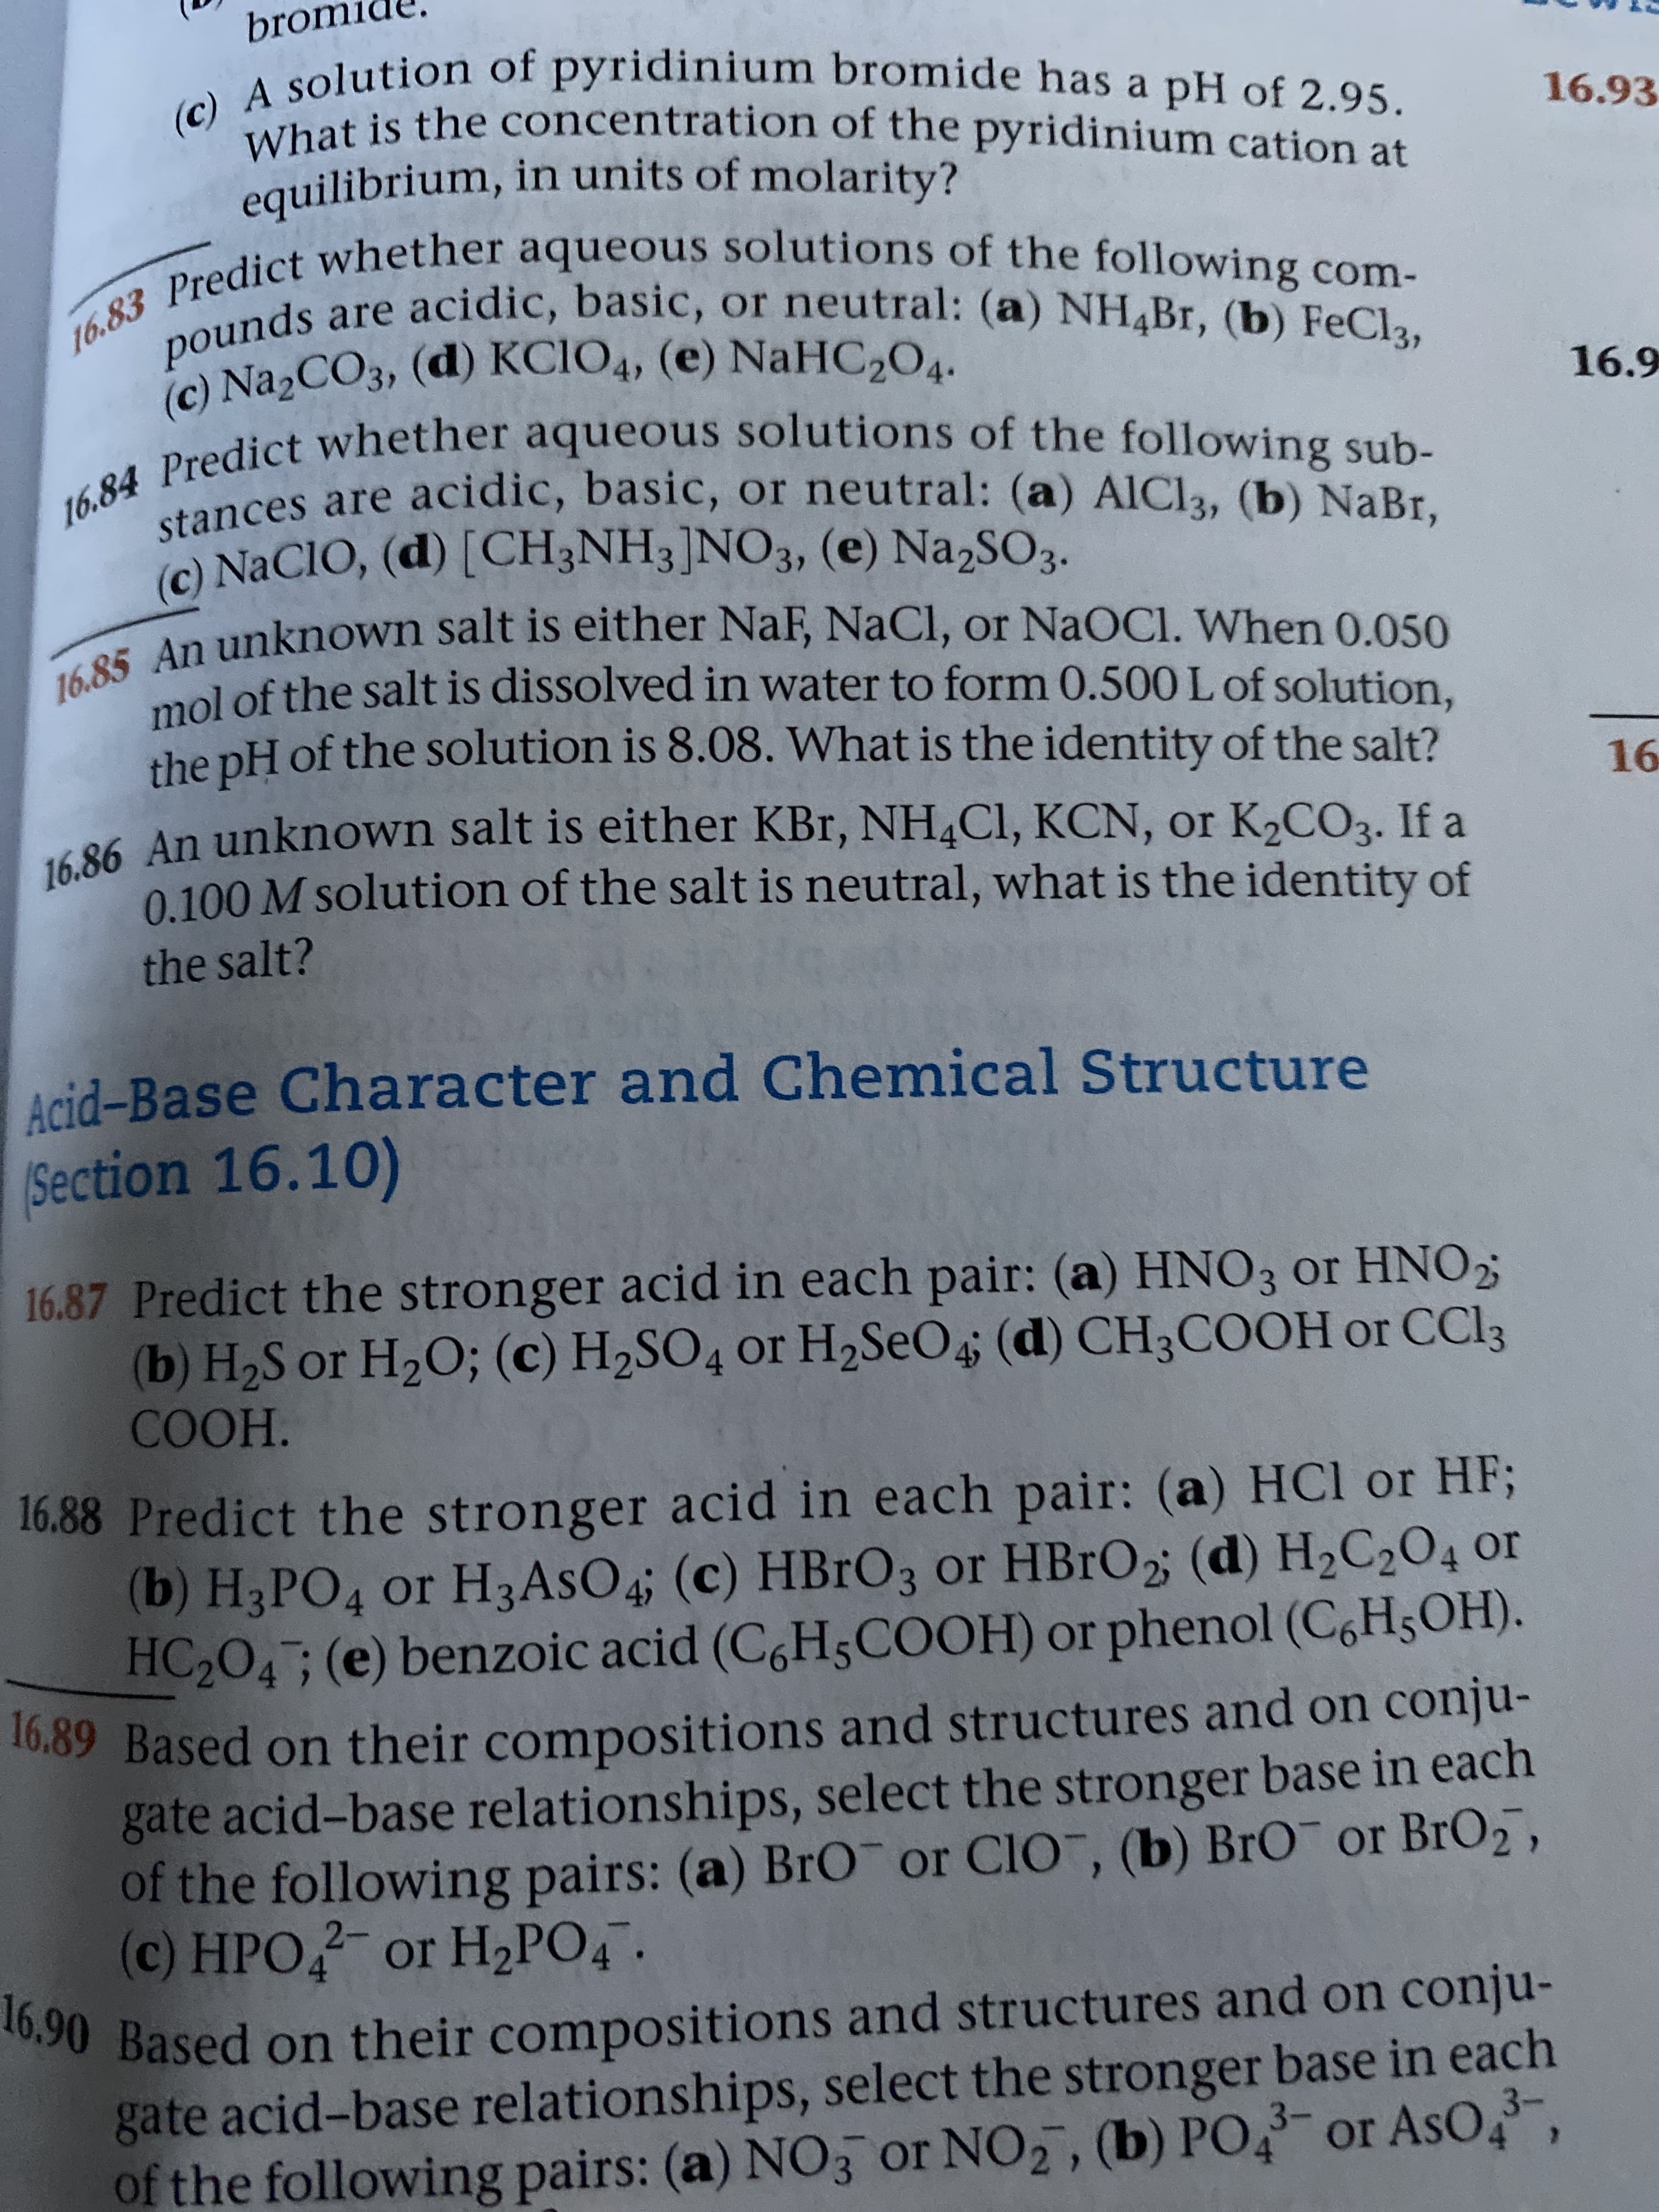 16.88 Predict the stronger acid in each pair: (a) HCl or HF;
(b) H3PO4 or H3ASO4; (c) HBr03 or HBRO2 (d) H2C2O4 or
HC204; (e) benzoic acid (C,H5COOH) or phenol (C,H5OH).
ונווar"
